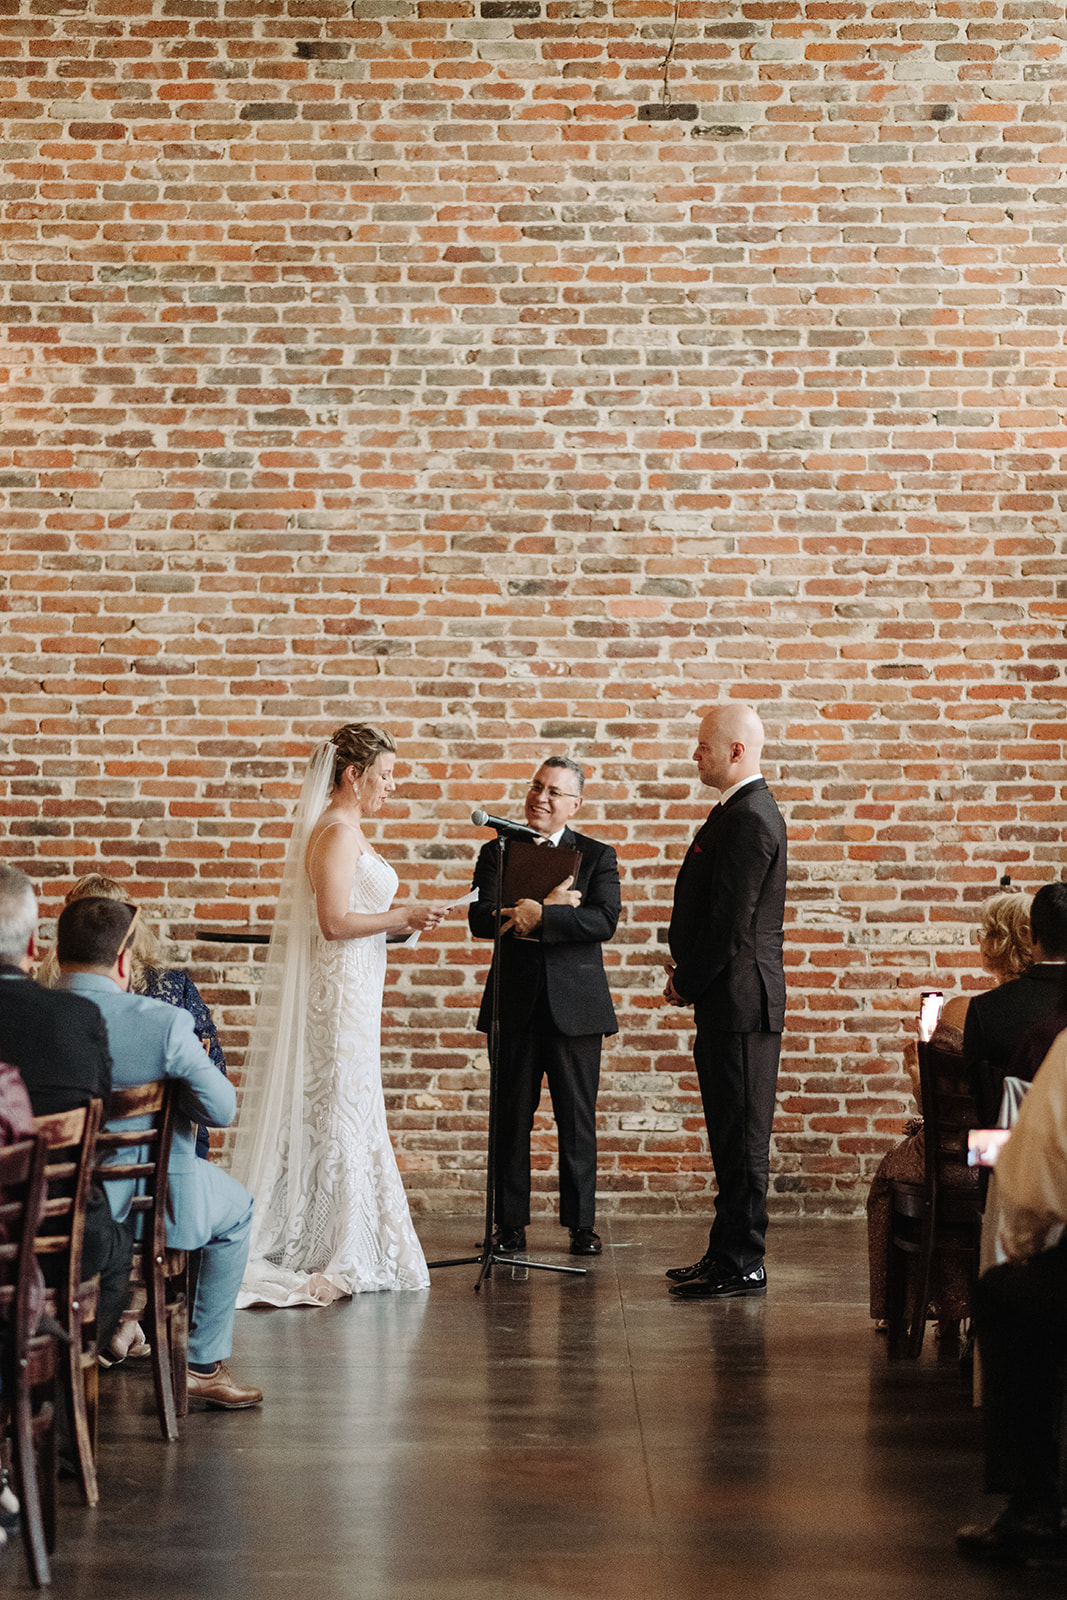 The exposed brick wall that is used as the backdrop for this Mile High Station wedding.